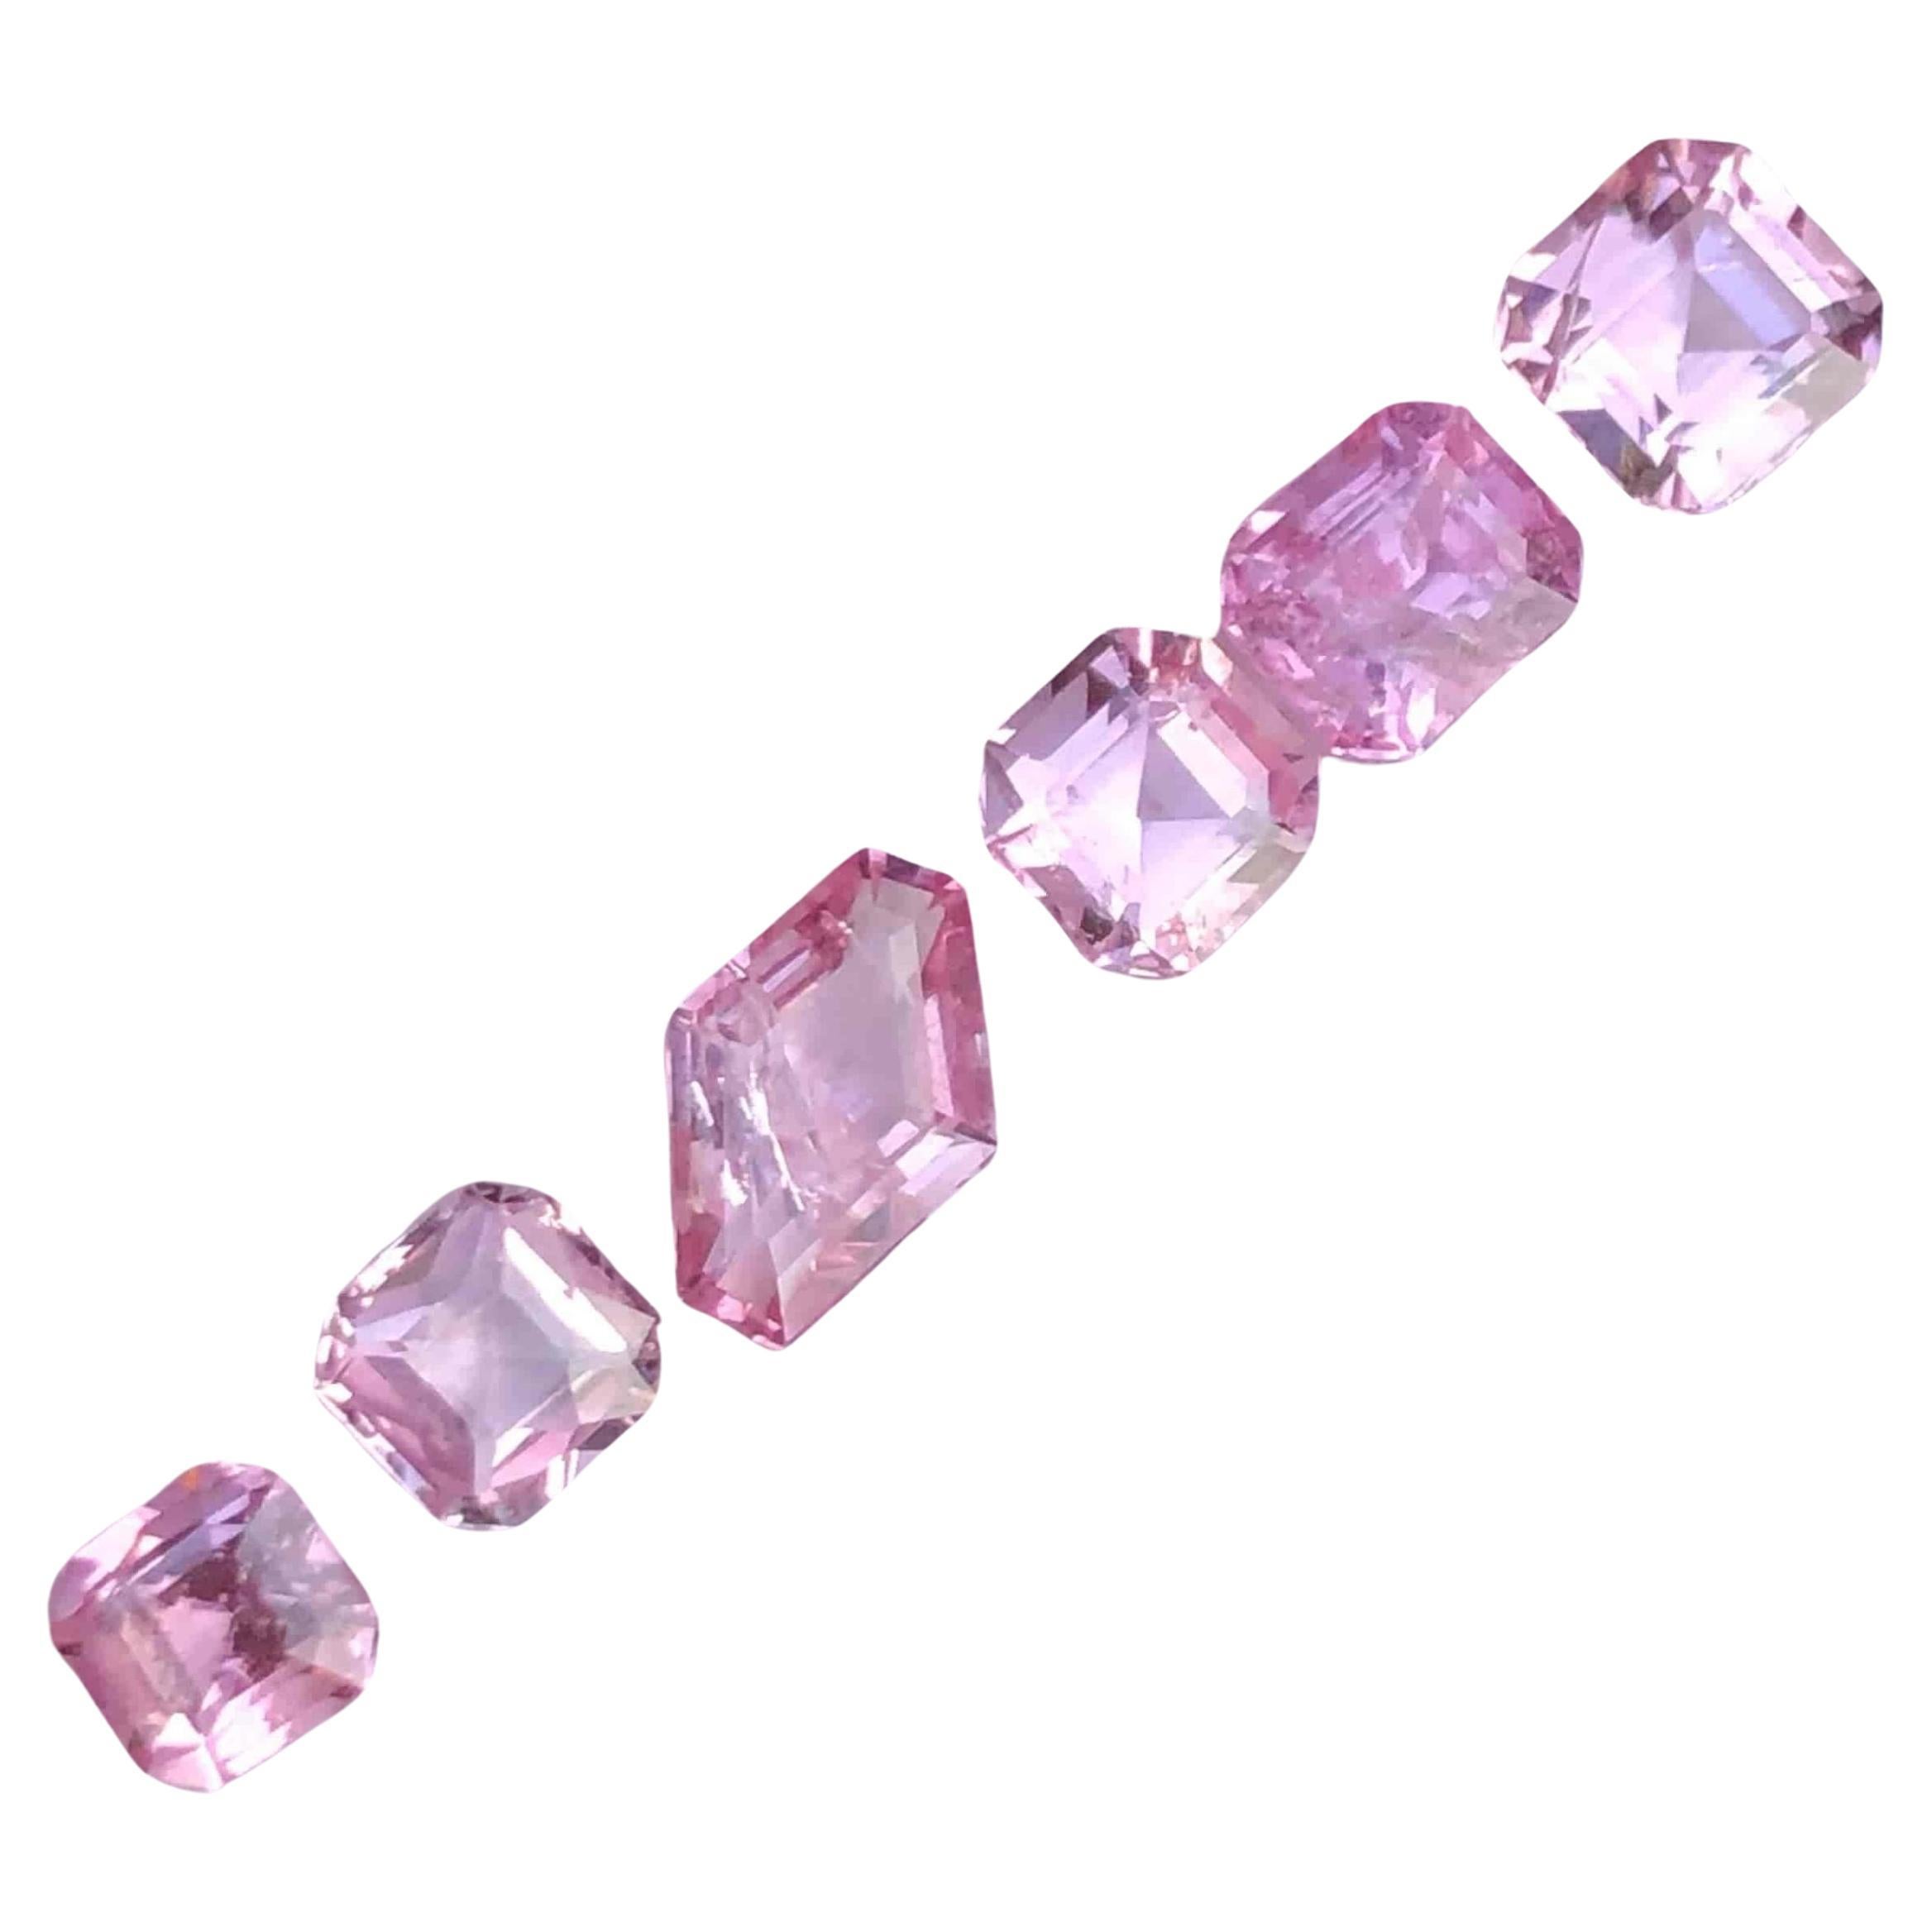 4.40 carats Pink Spinel Stones Lot Natural Loose Gemstones From Tajikistan  For Sale